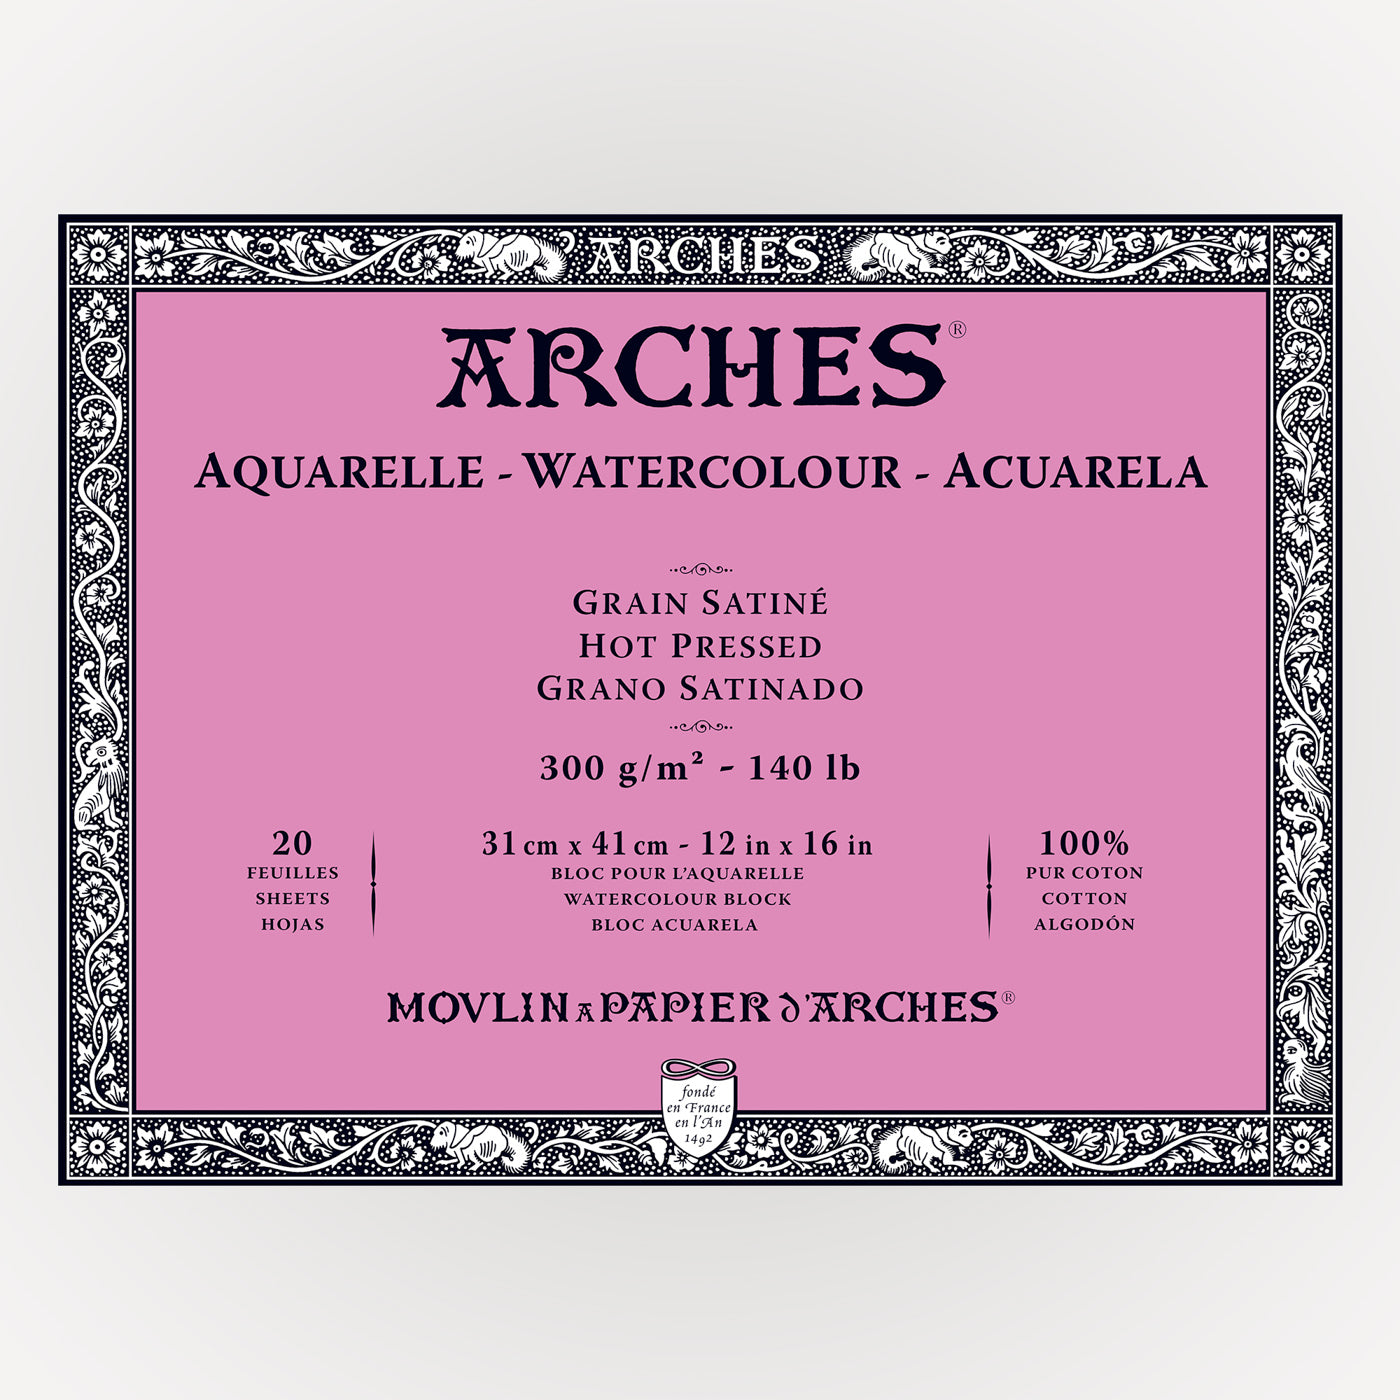 Arches Hot Pressed 31x41 300g 20 sheets